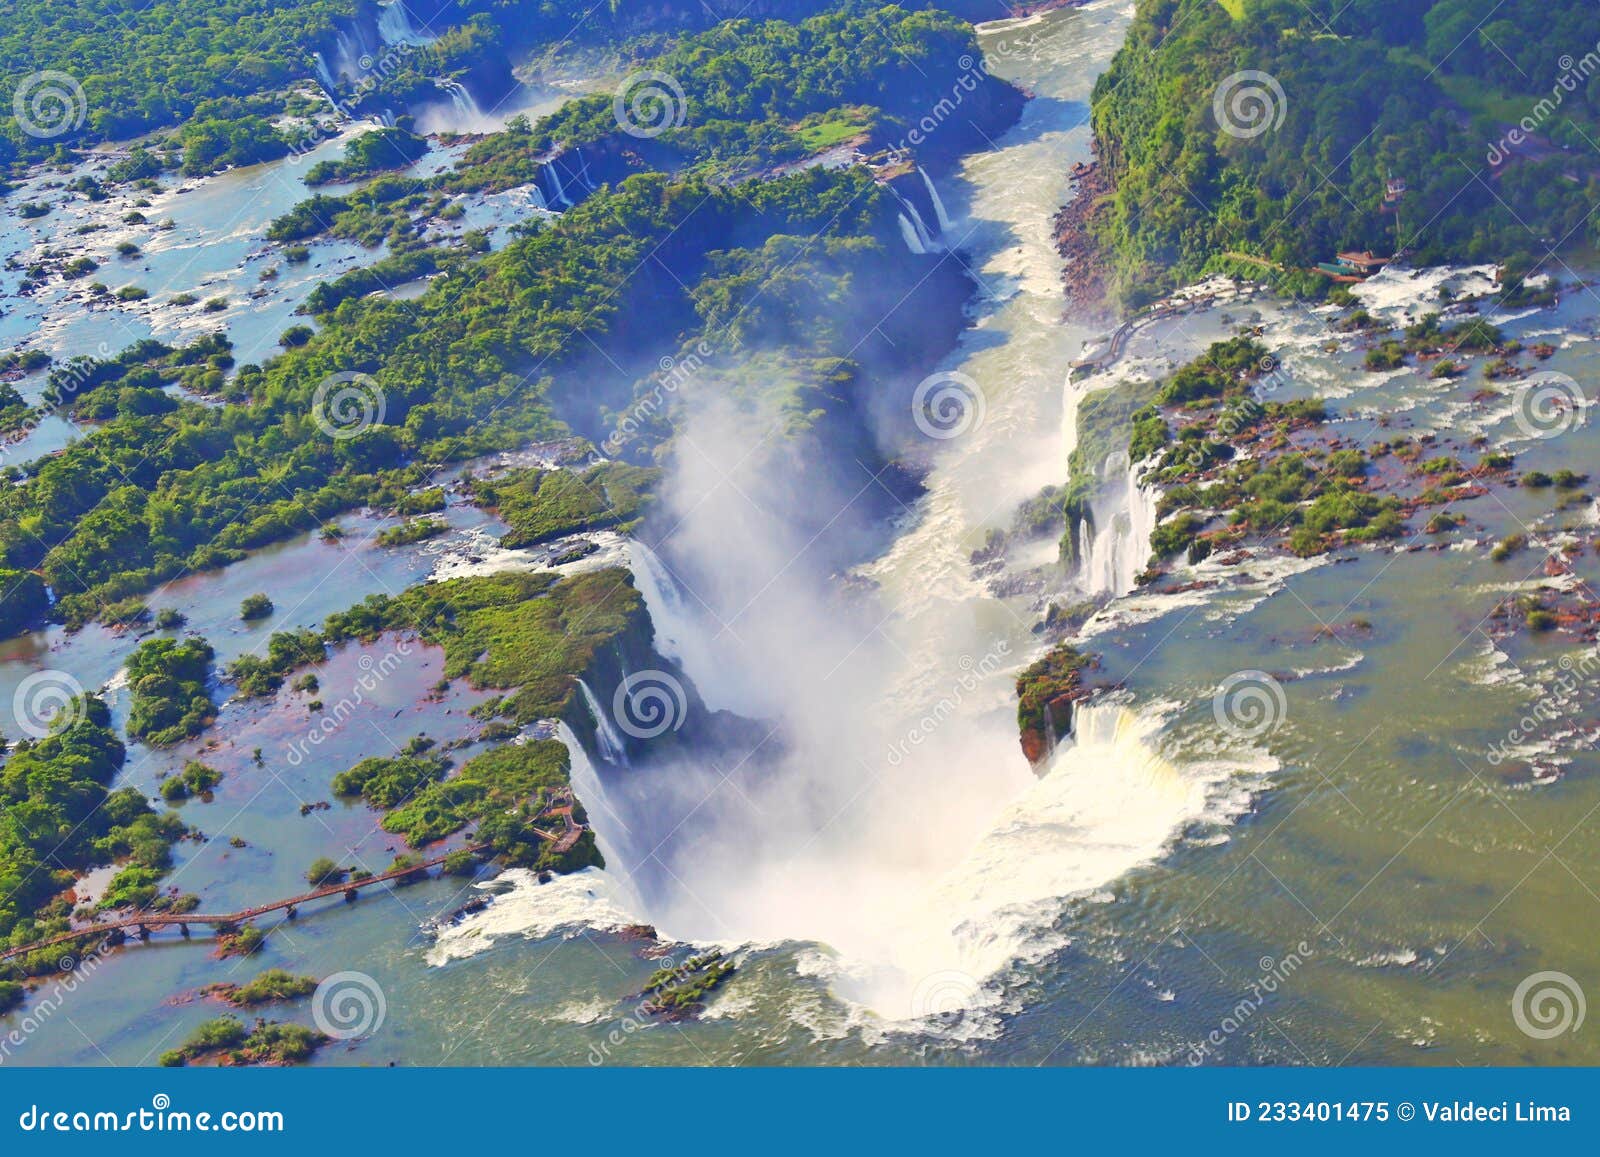 aerial view of a waterfall. environment with lots of green. mata atlantica do brasil, iguacu river in the interior of the state o